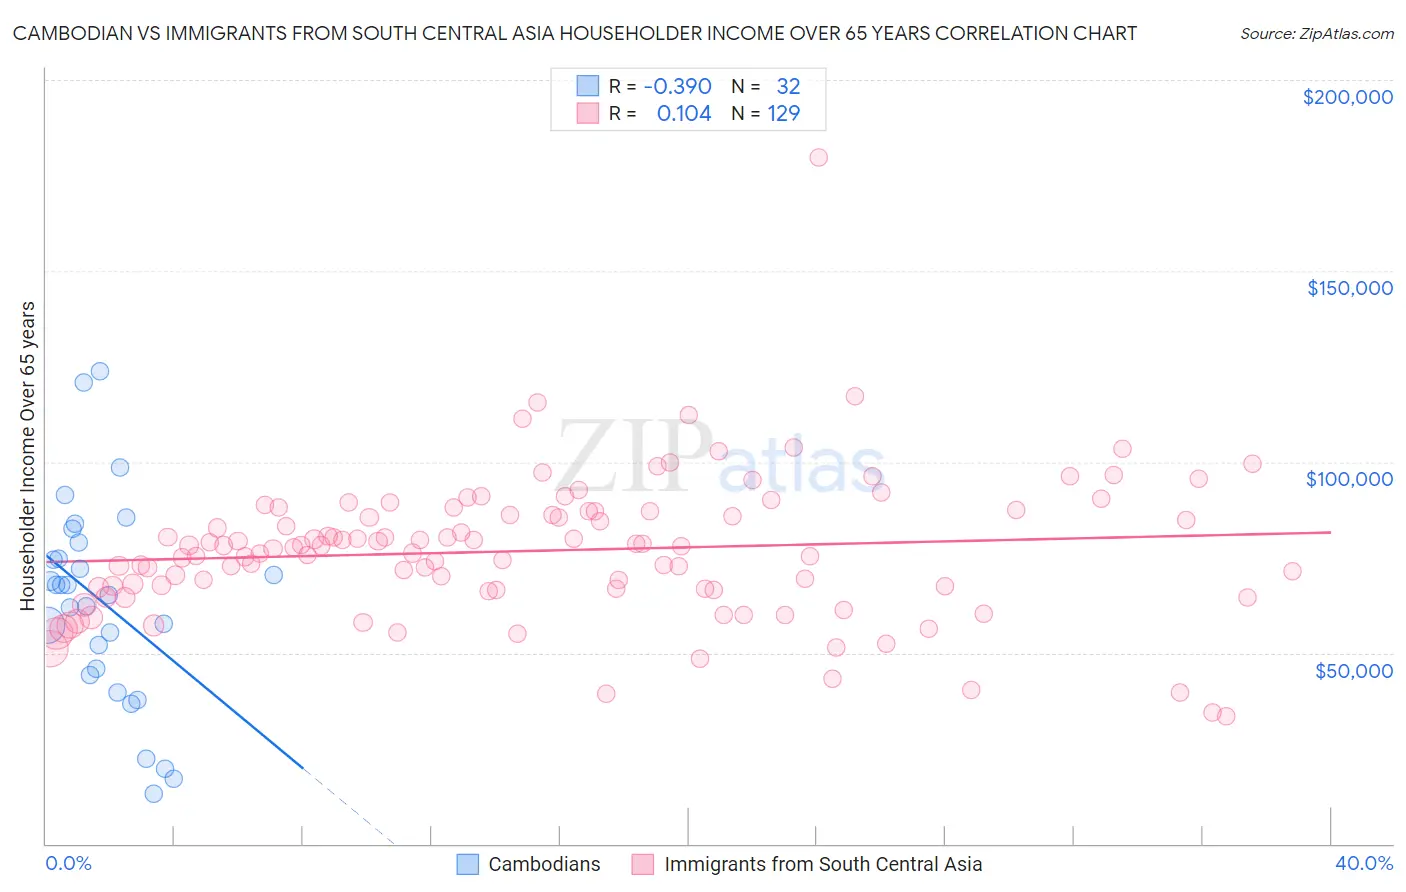 Cambodian vs Immigrants from South Central Asia Householder Income Over 65 years